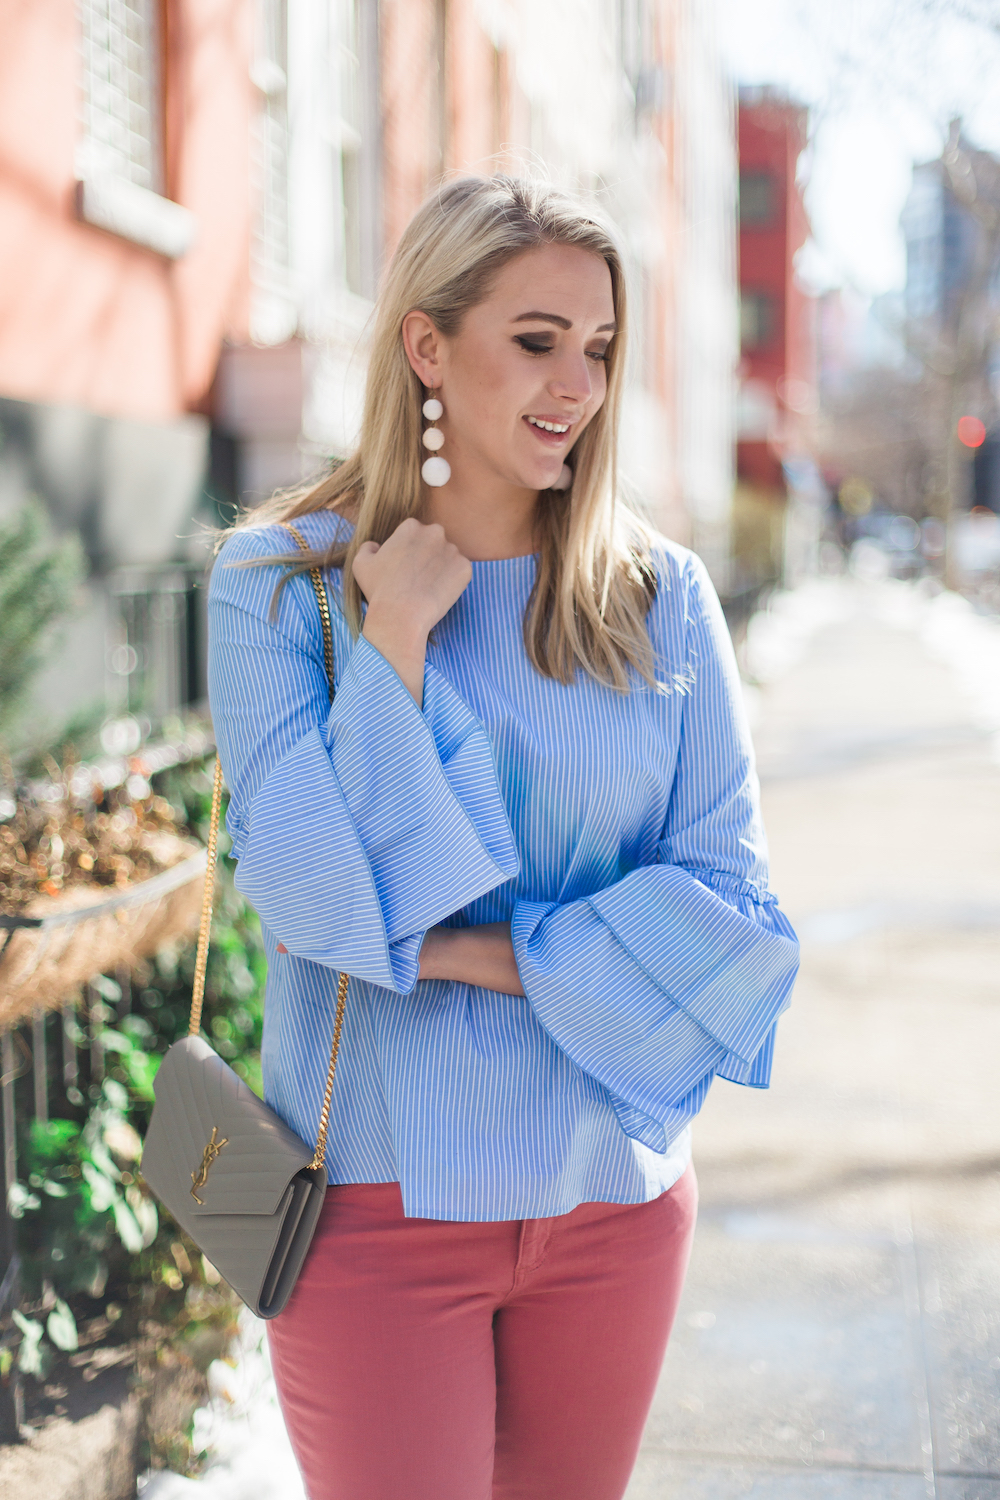 Blue and White Striped Bell Sleeves - Kayleigh's Kloset